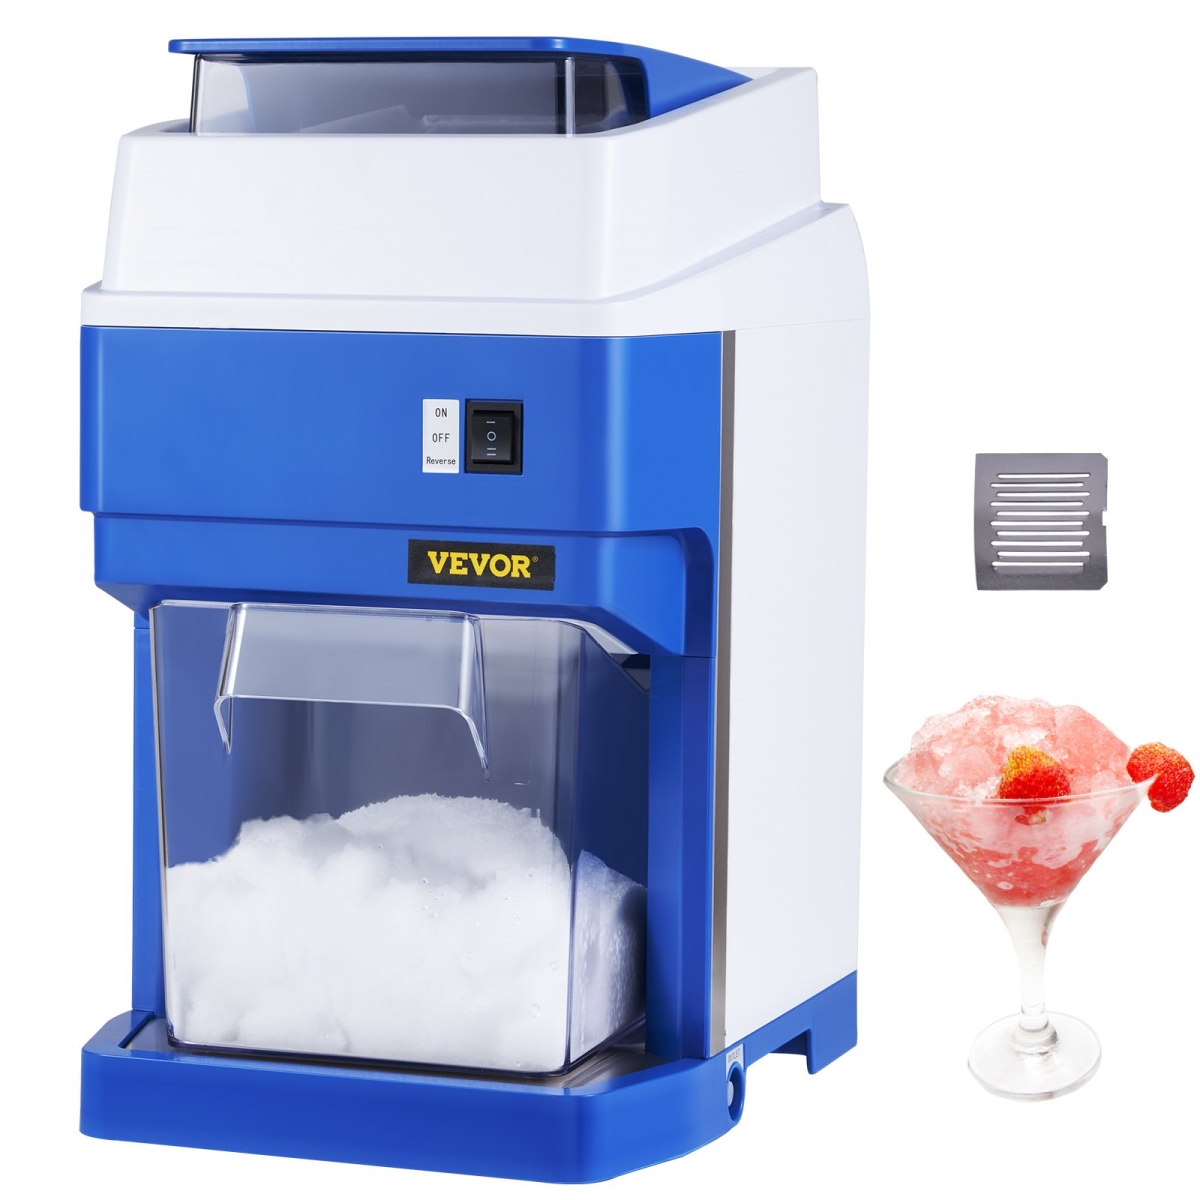 Picture of Vevor BBJBXS154400WZY00V1 265 lbs Per Hour Electric Snow Cone Maker with 4.4lbs Ice Box